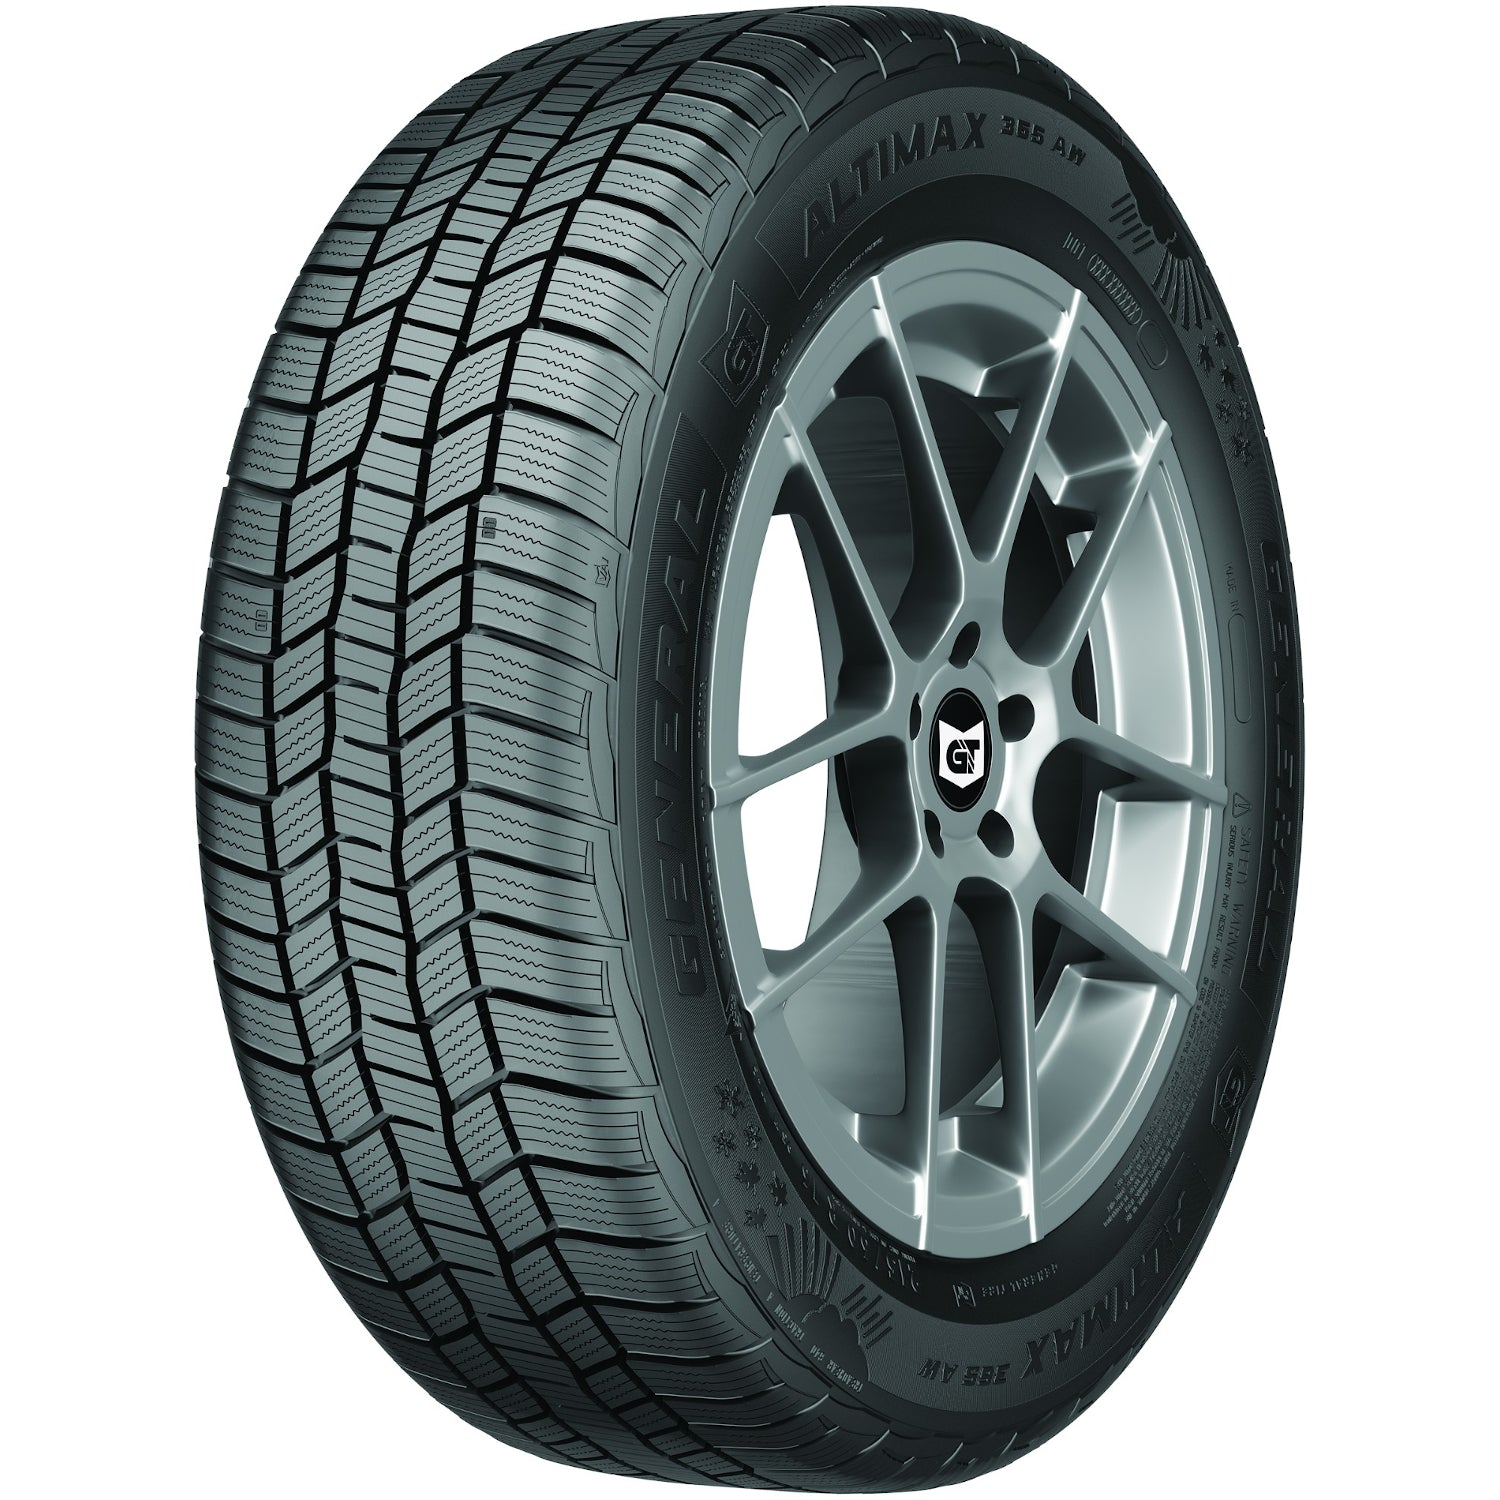 GENERAL ALTIMAX 365AW 225/65R16 (27.5X8.9R 16) Tires